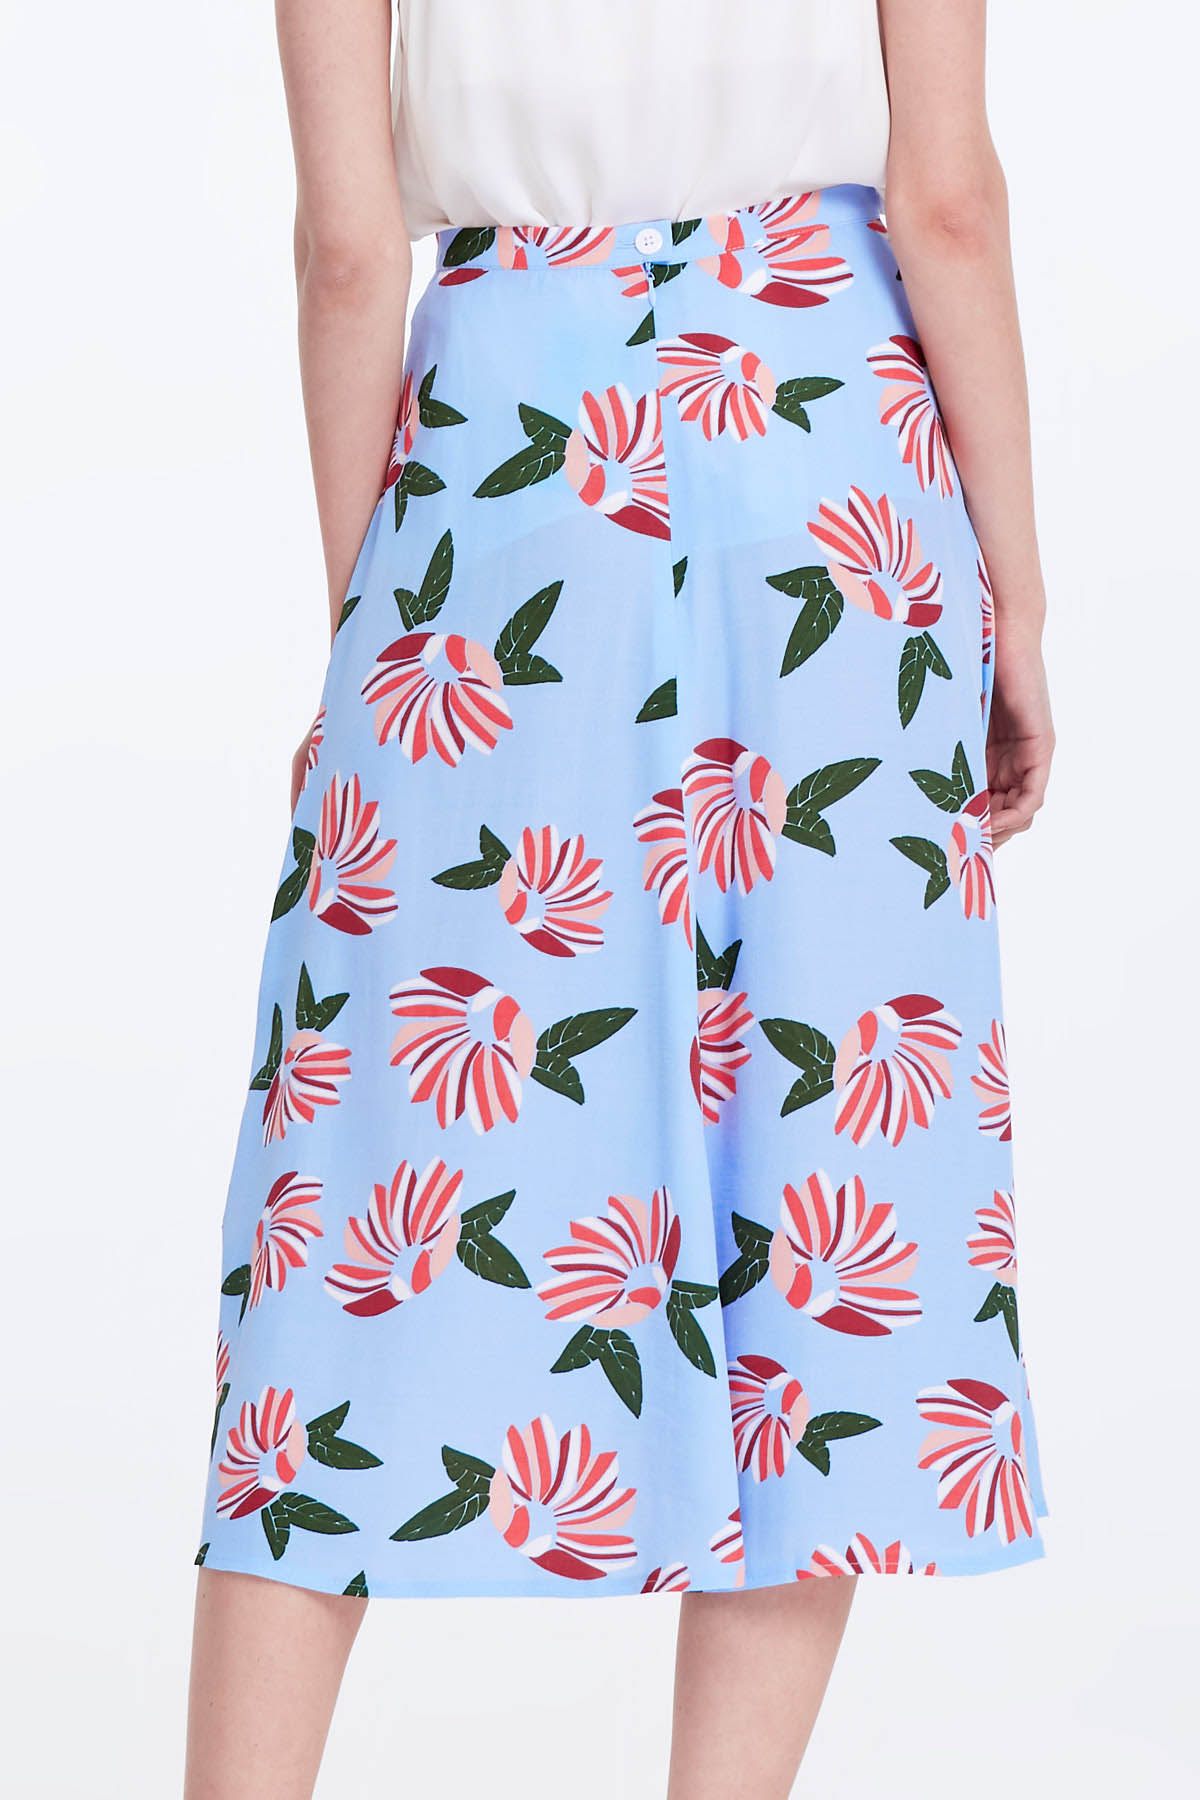 Midi blue skirt with a floral print , photo 6